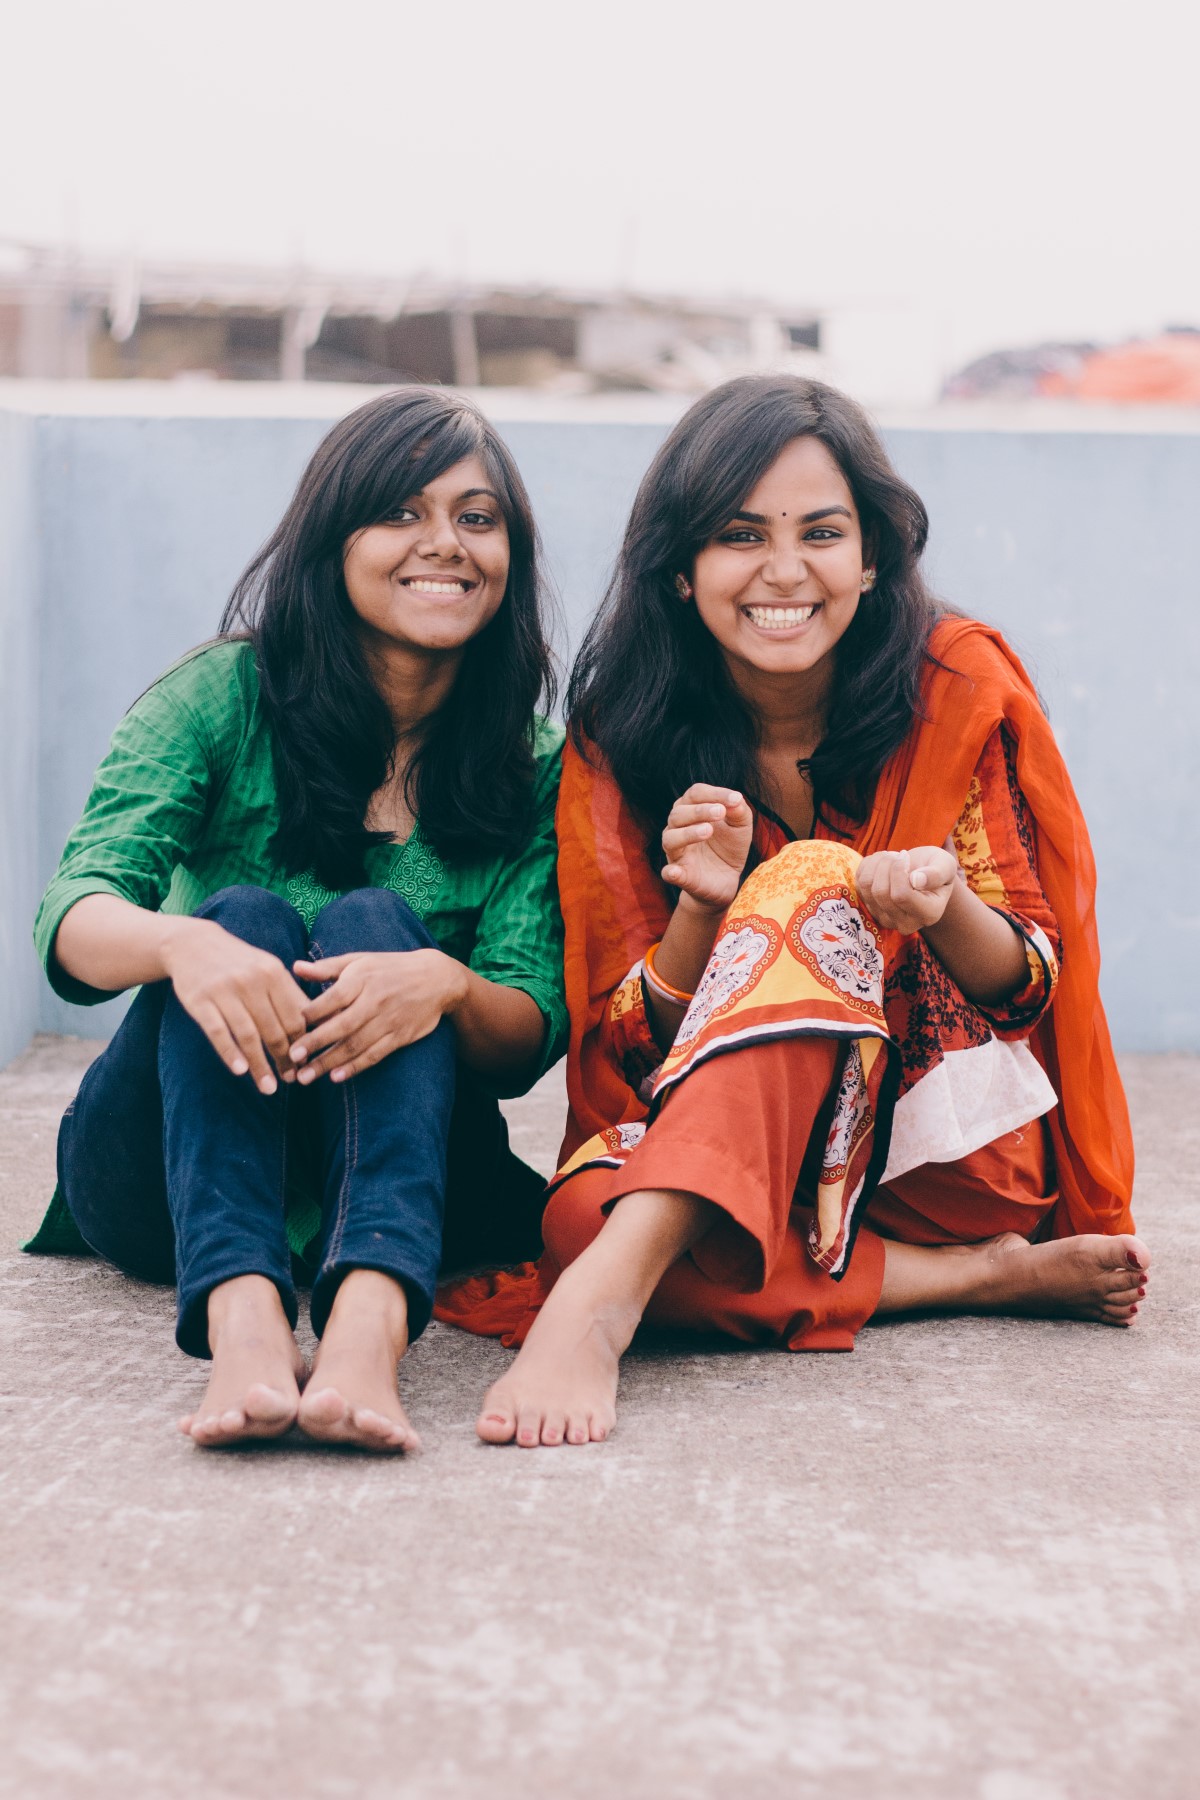 Two young women sitting and smiling together